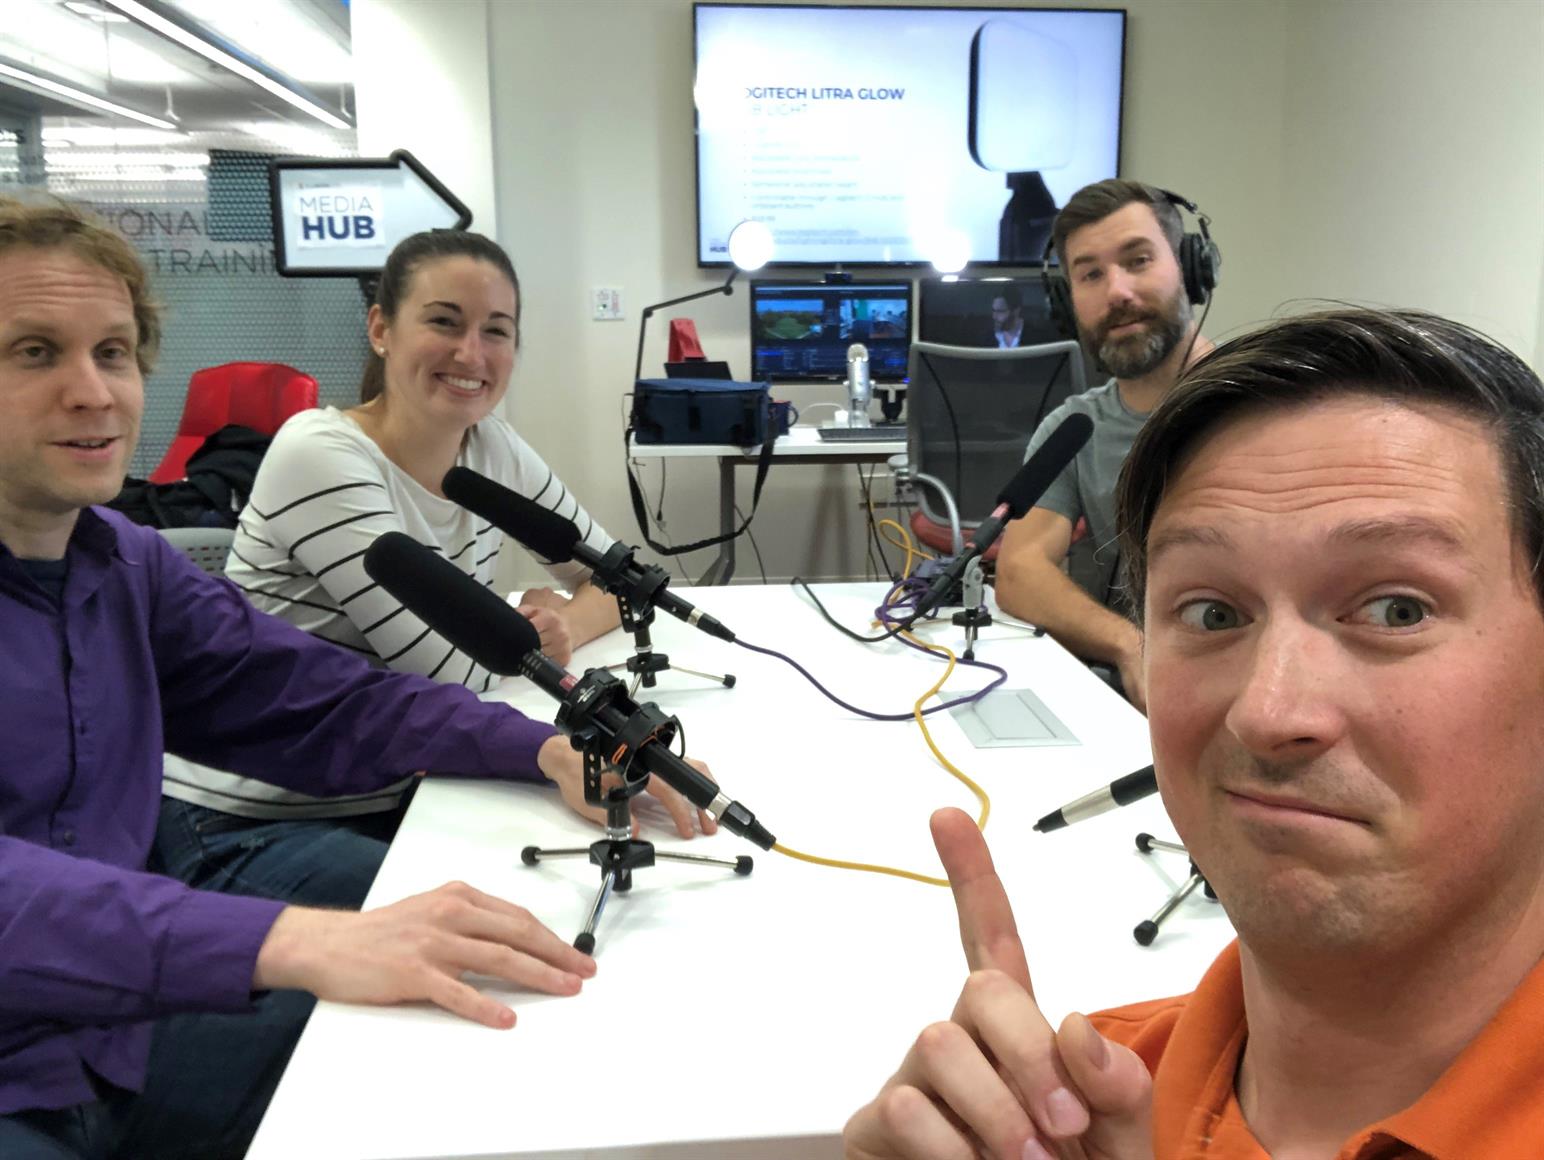 Selfie picture of 4 people around table with microphones.